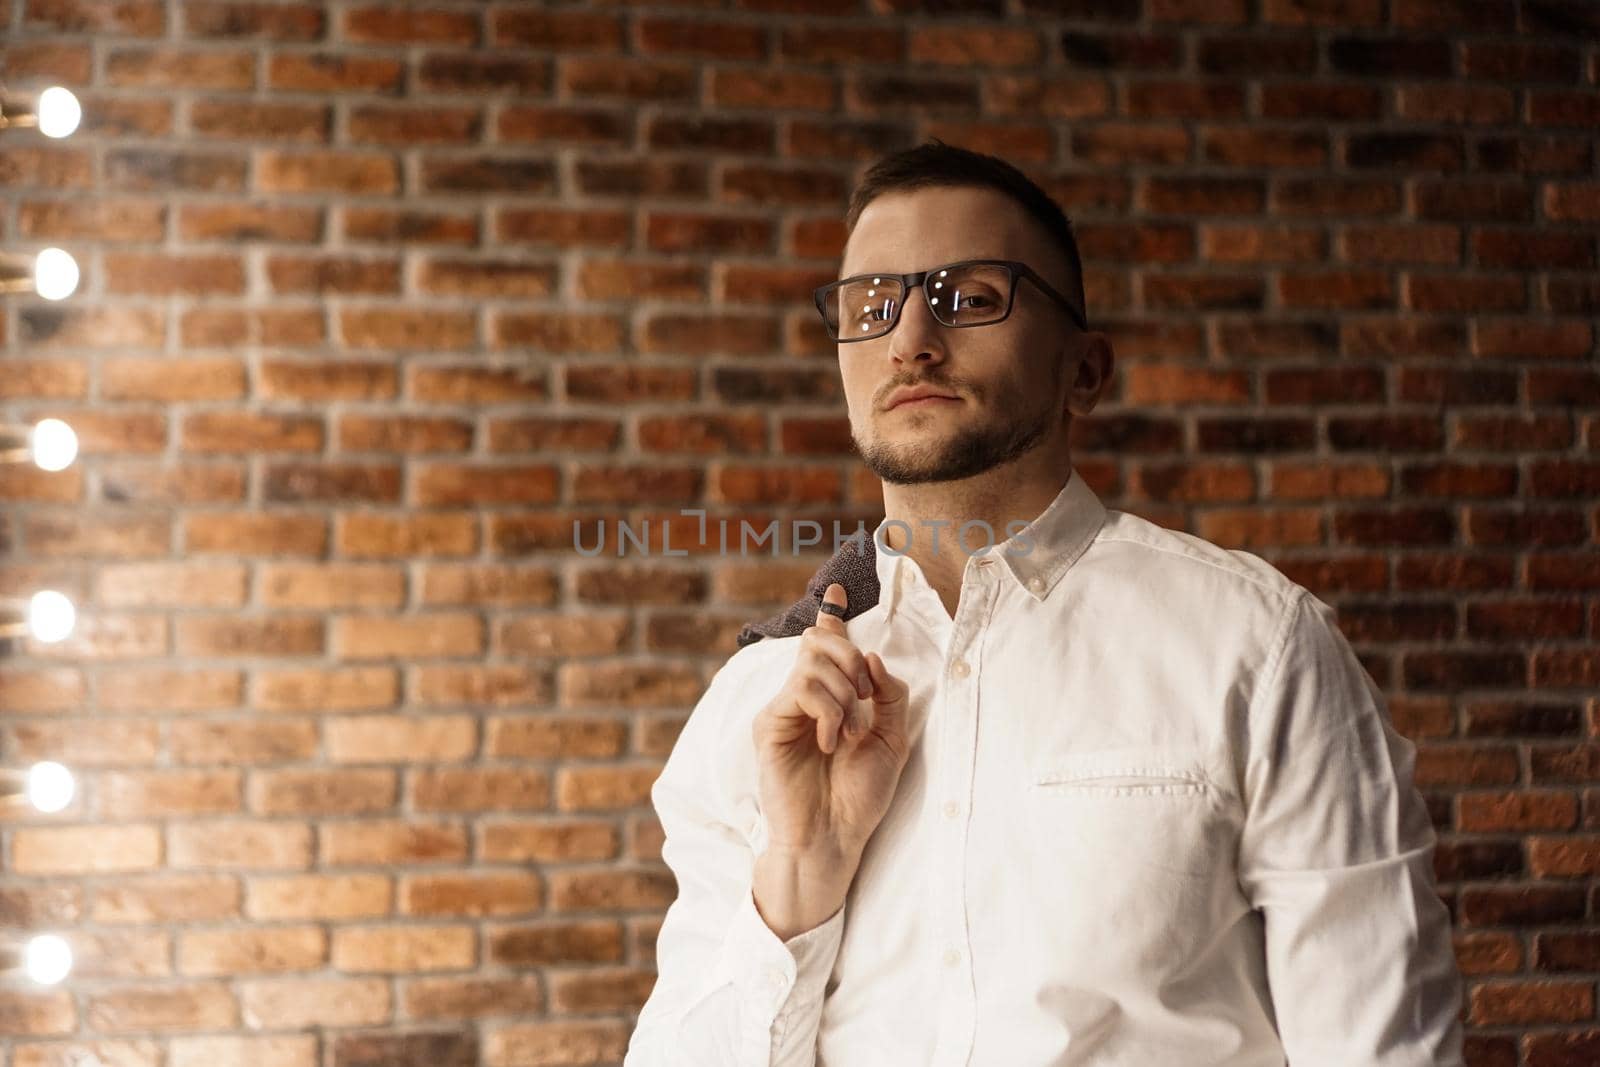 Handsome man in white shirt with glasses standing near red brick wall